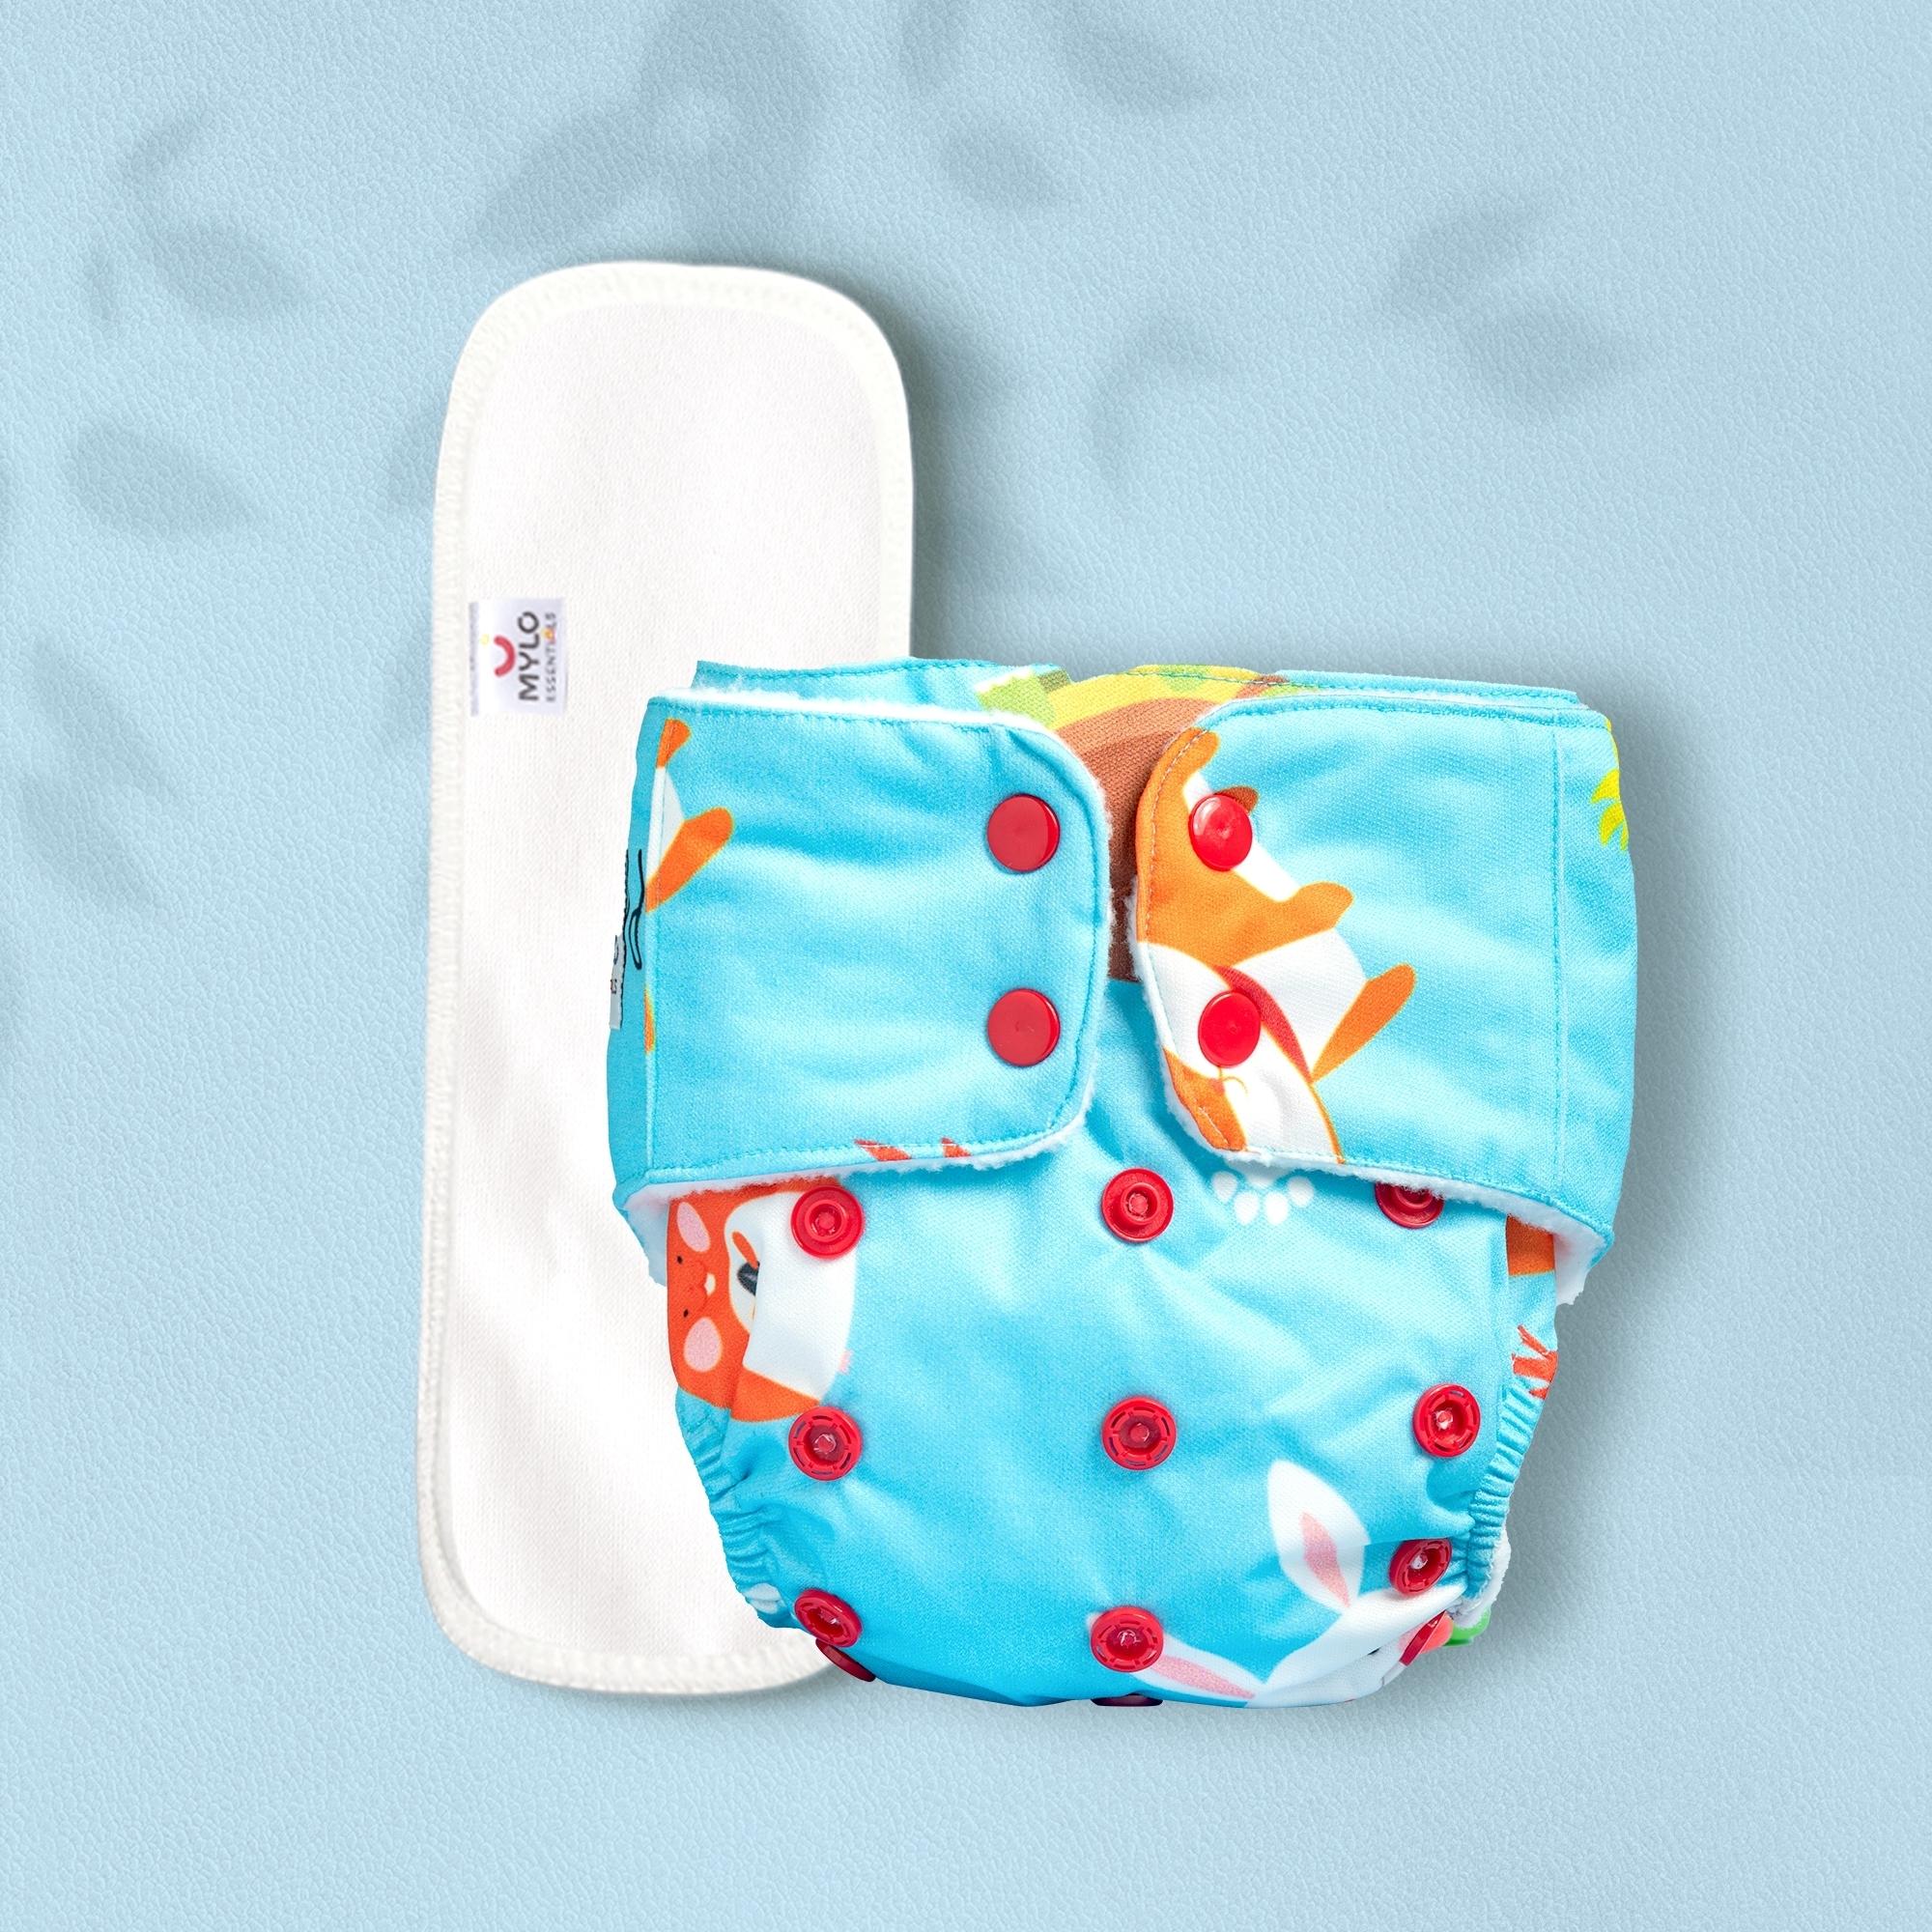 Animal Friends Baby Pocket Cloth Diaper Nappy Hook and Loop 